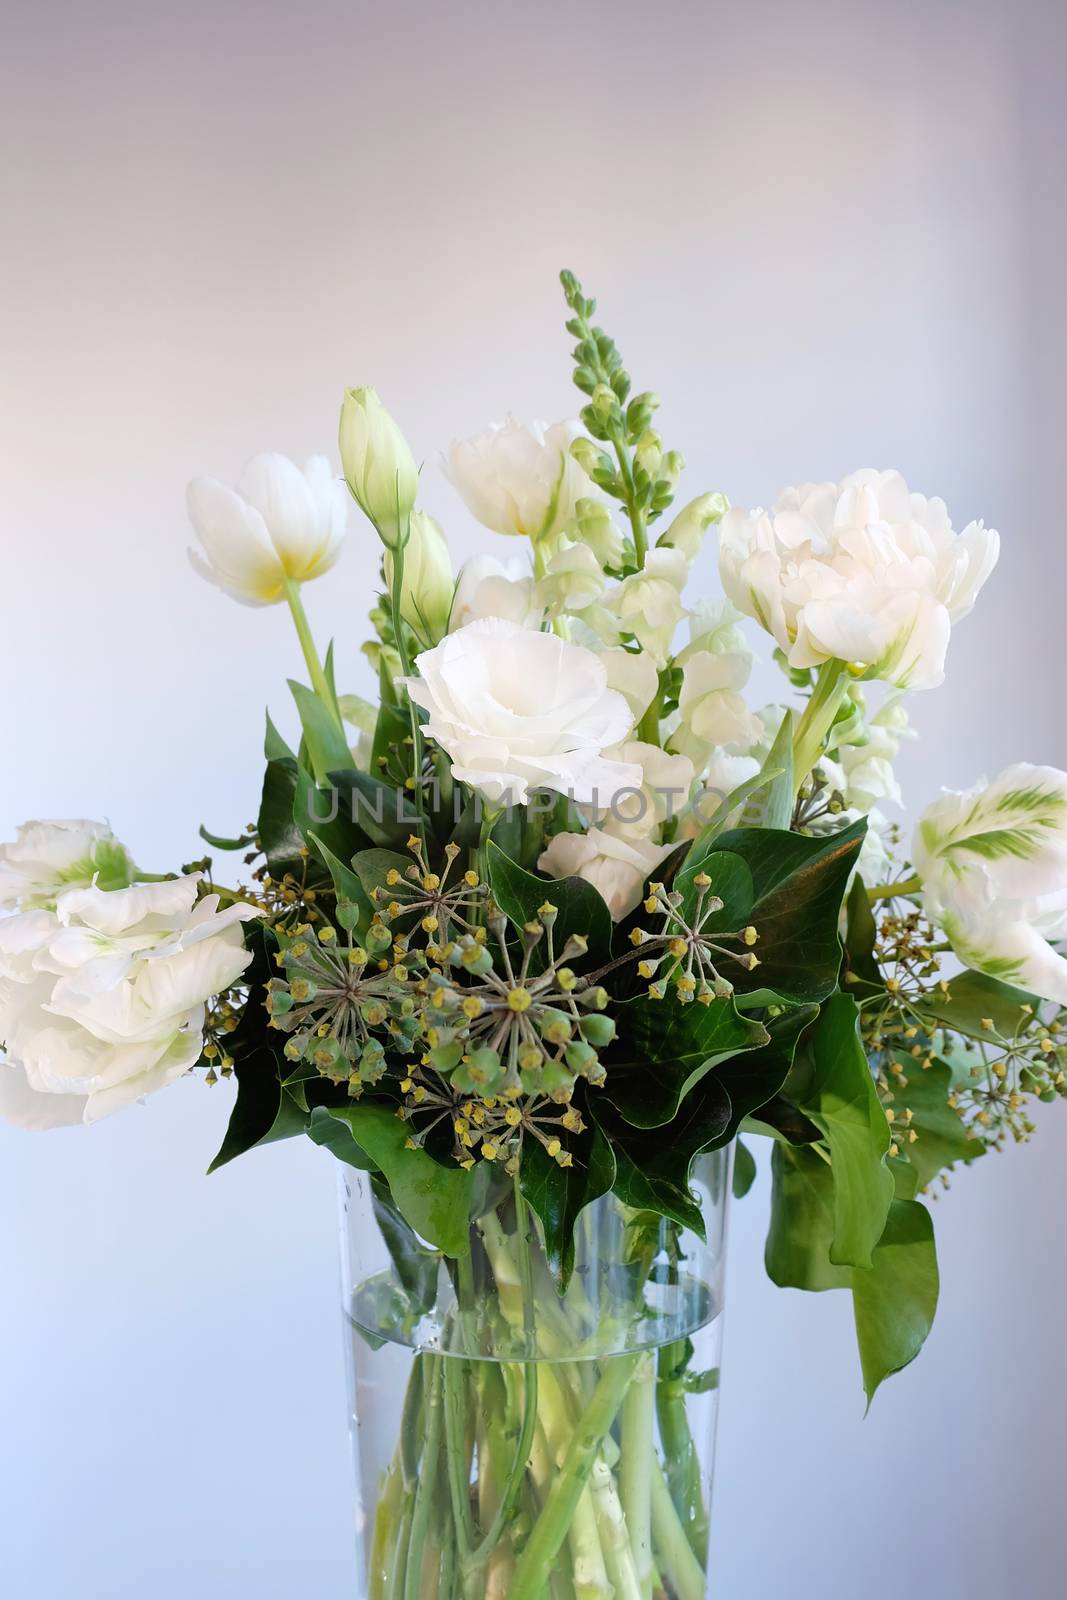 Bouquet of white and green flowers in a glass vase 